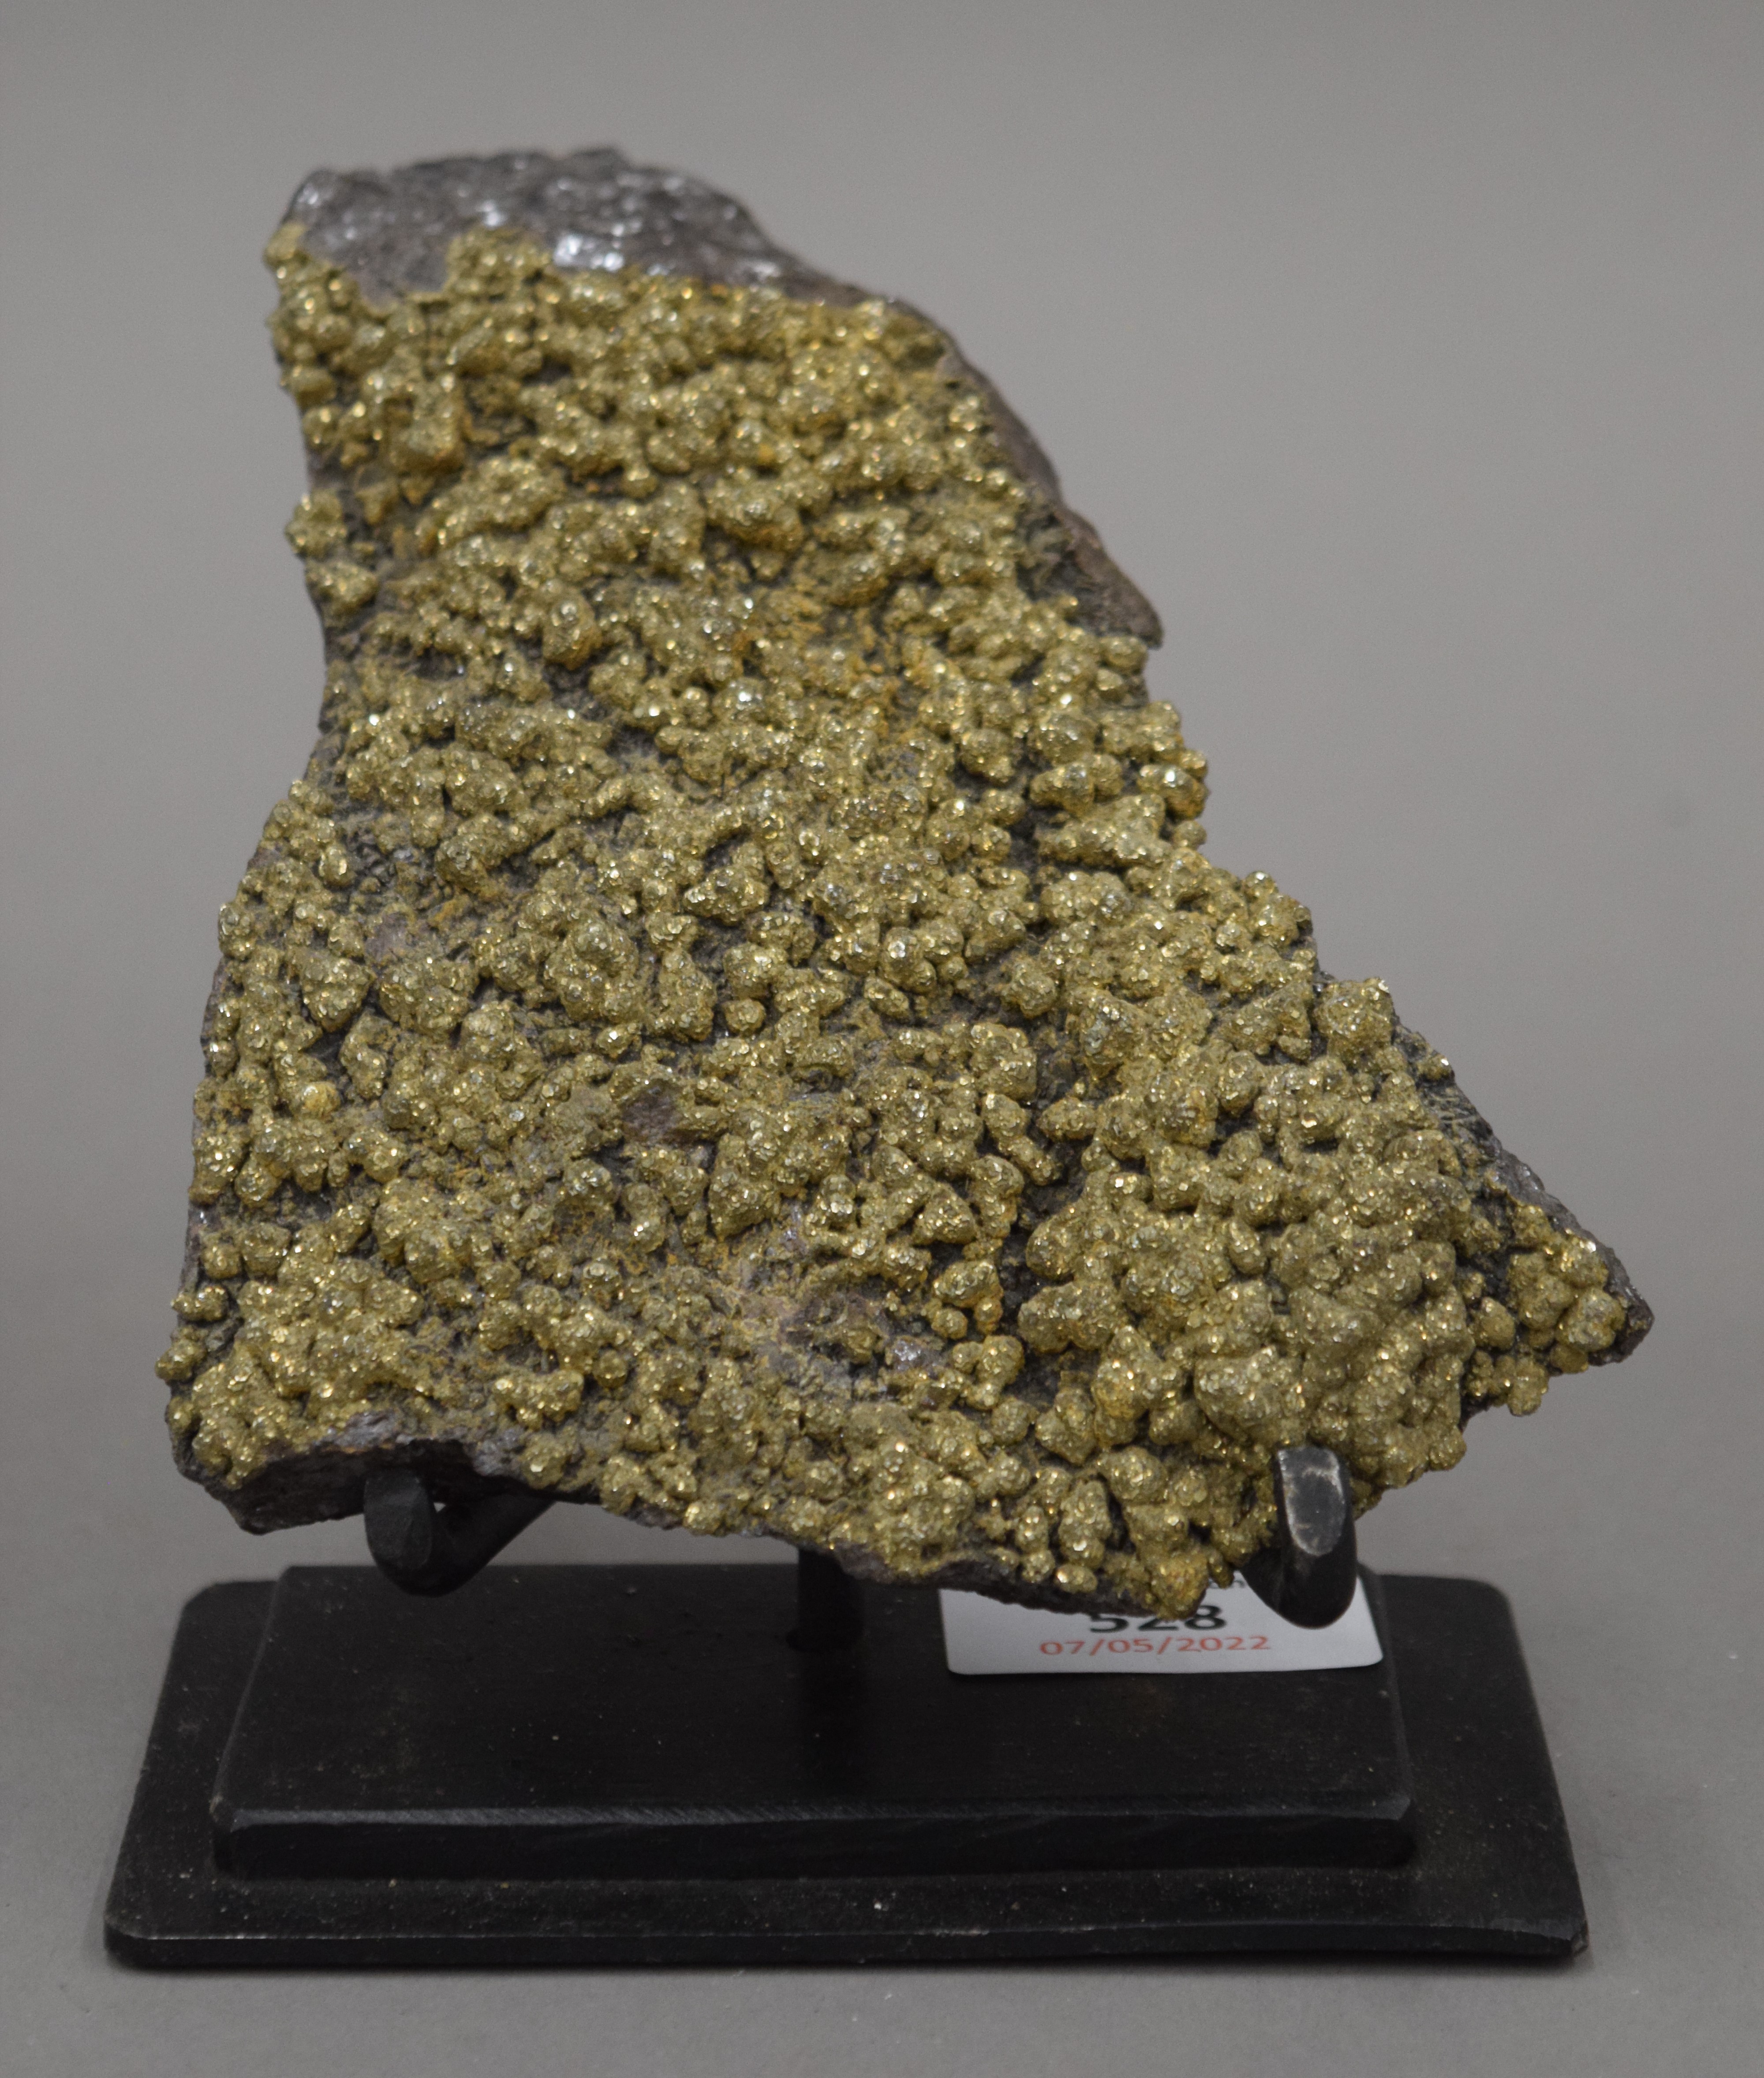 A pyrites specimen on stand.